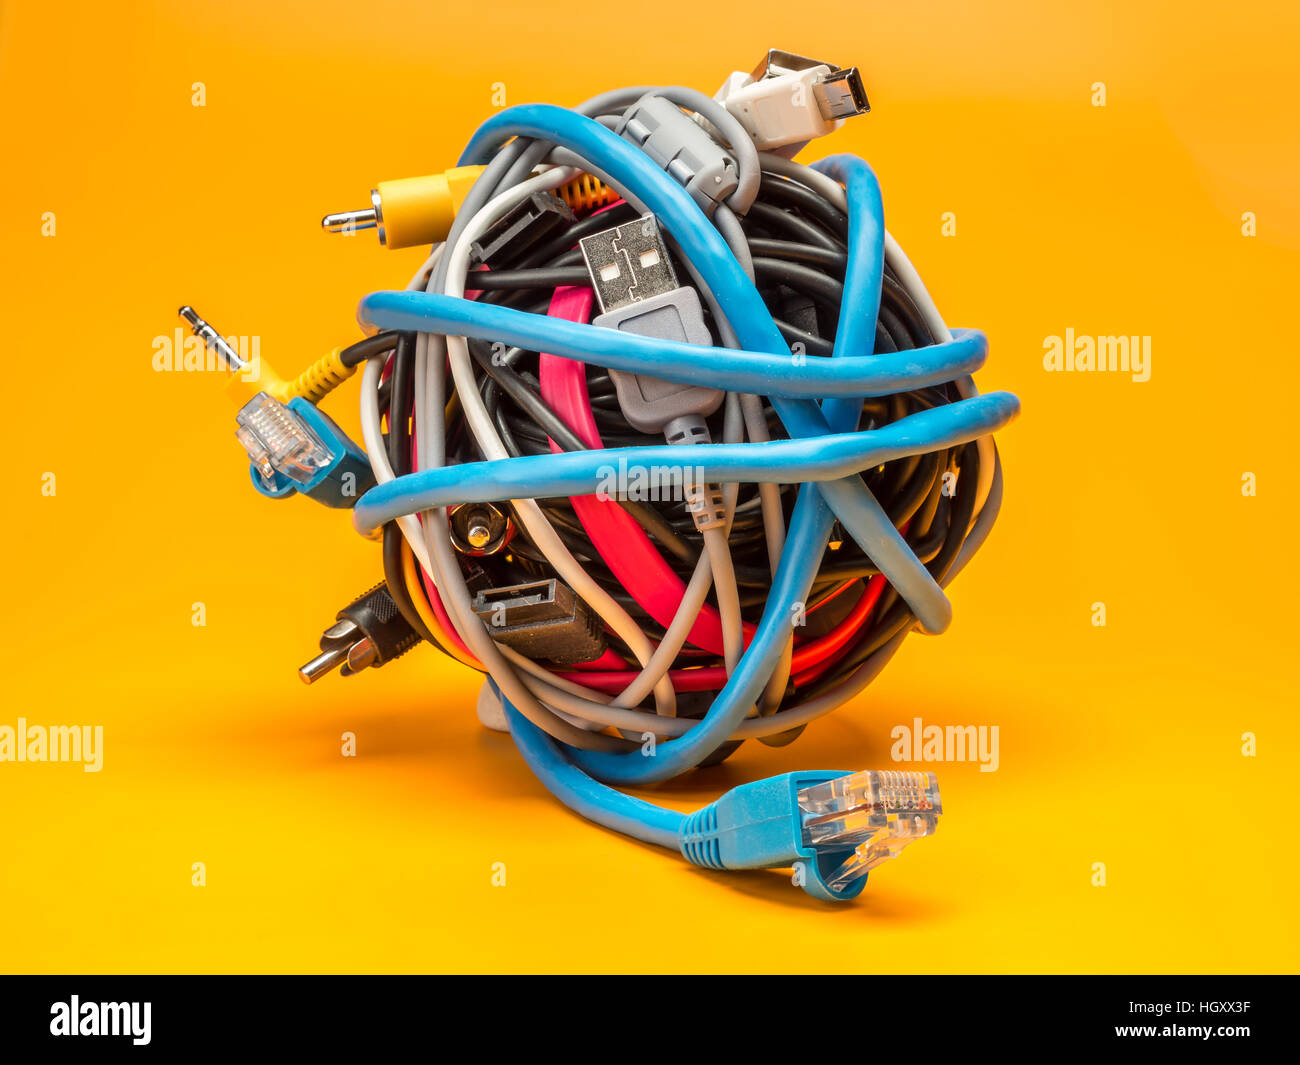 Tangled roll of computer wires over yellow background Stock Photo